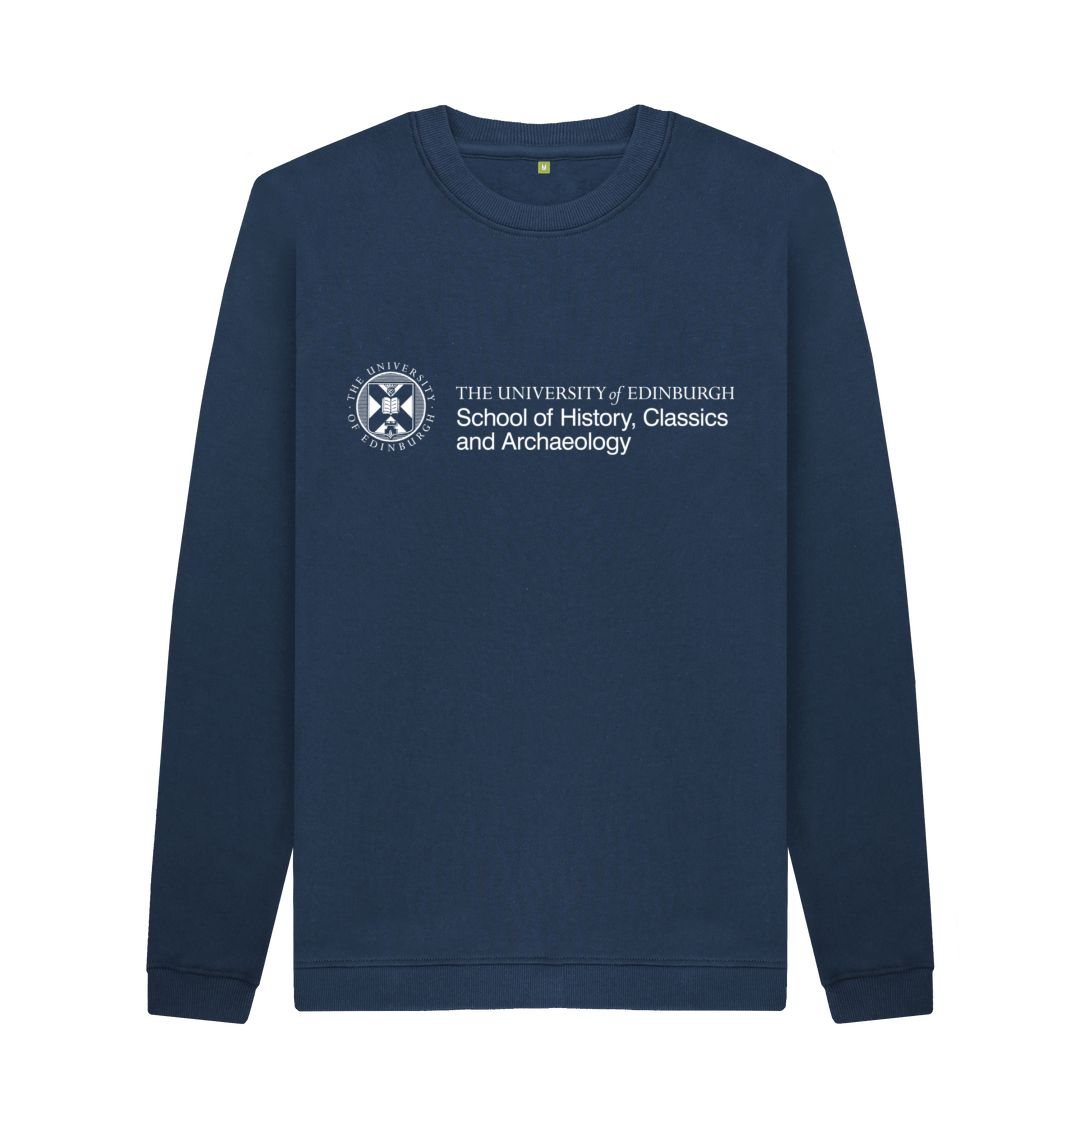 Navy sweatshirt with white University crest and text that reads ' University of Edinburgh School of History, Classics and Archaeology